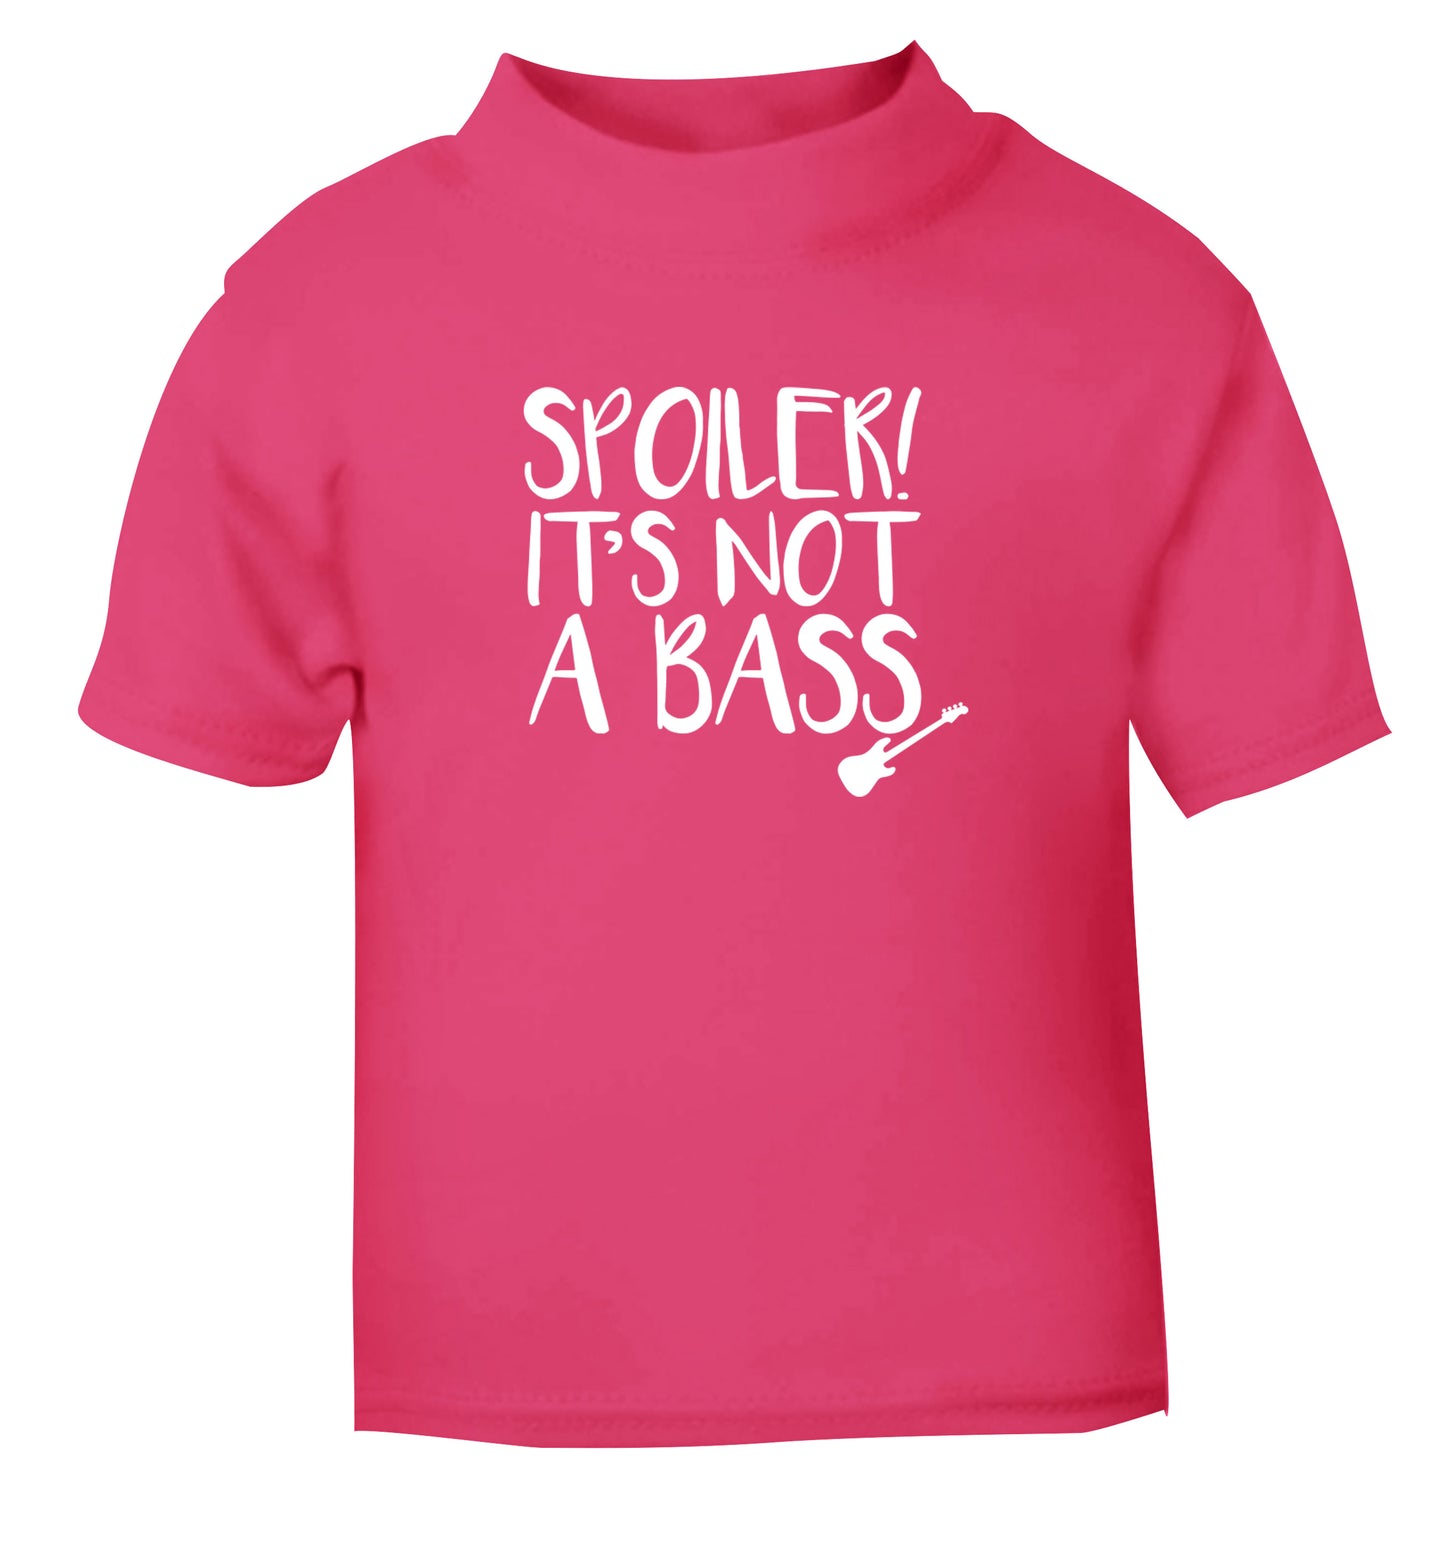 Spoiler it's not a bass pink Baby Toddler Tshirt 2 Years